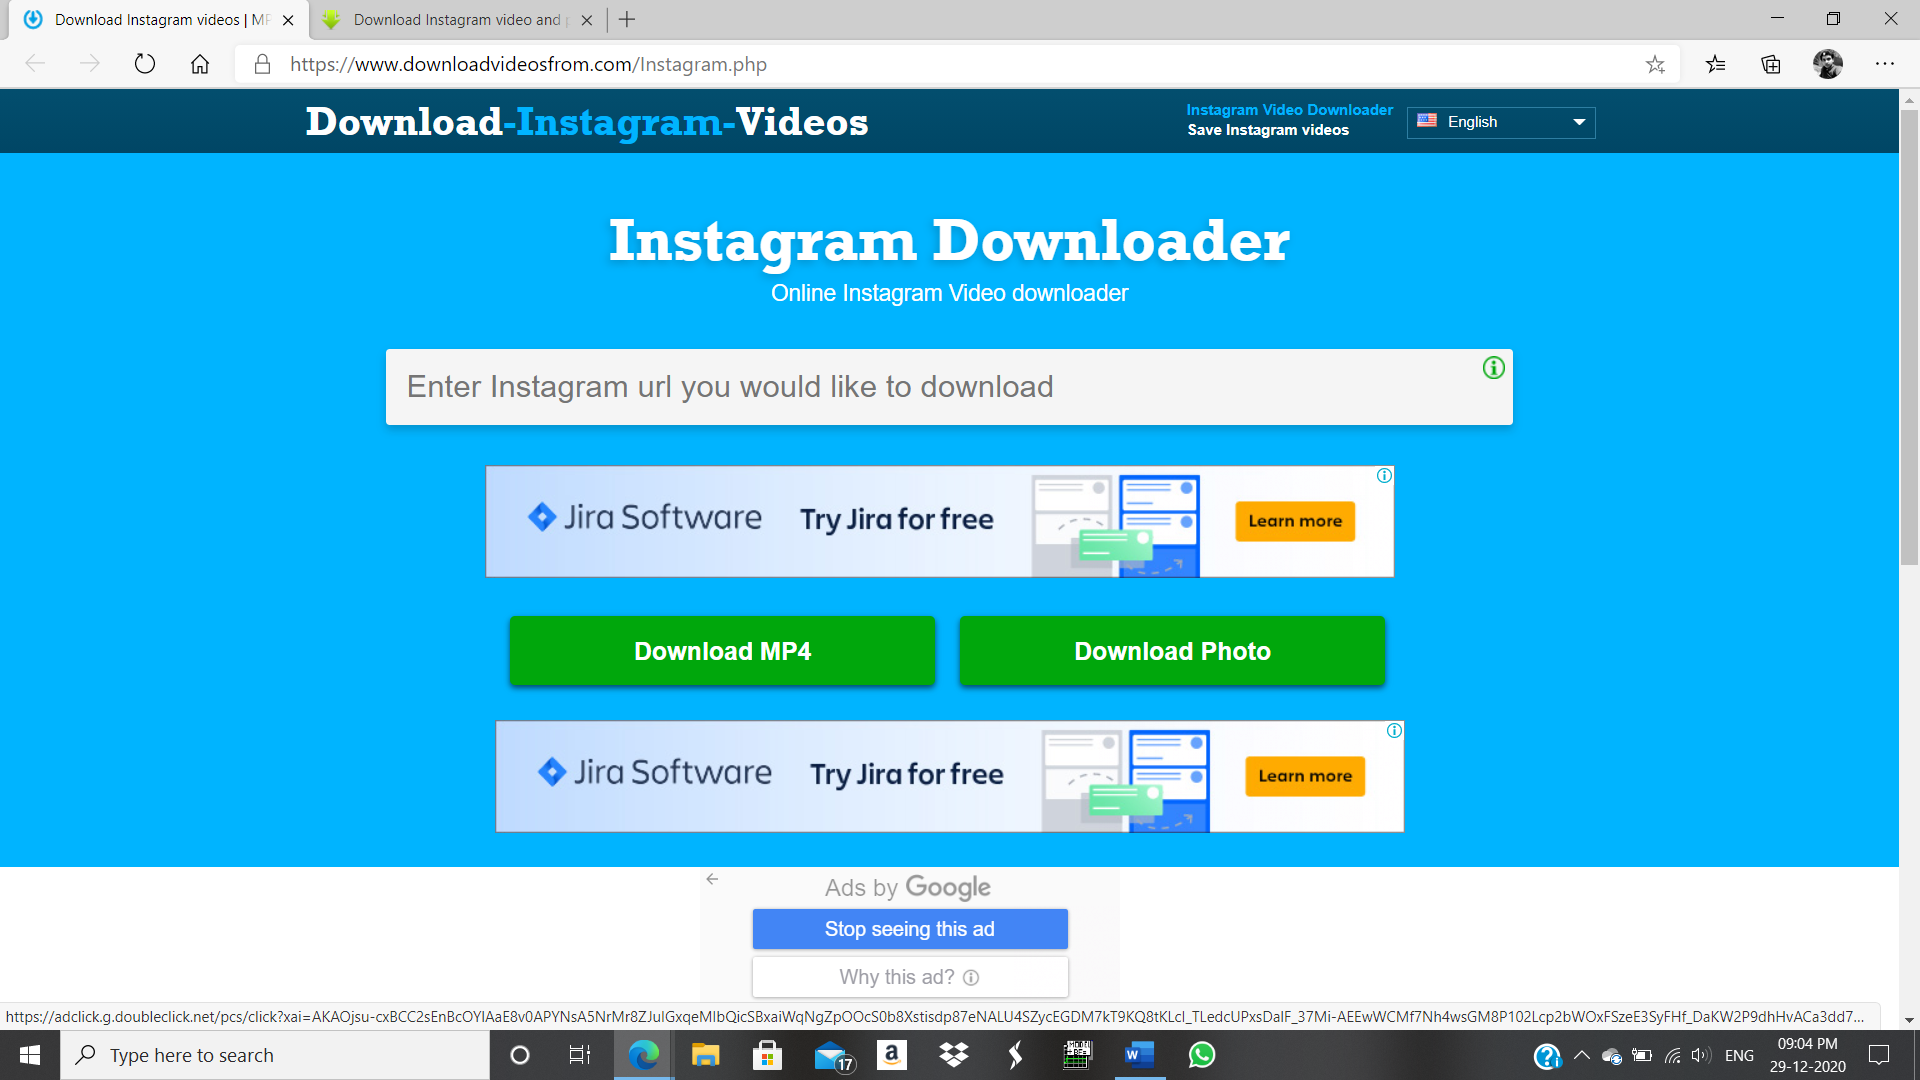 How to Download Instagram videos